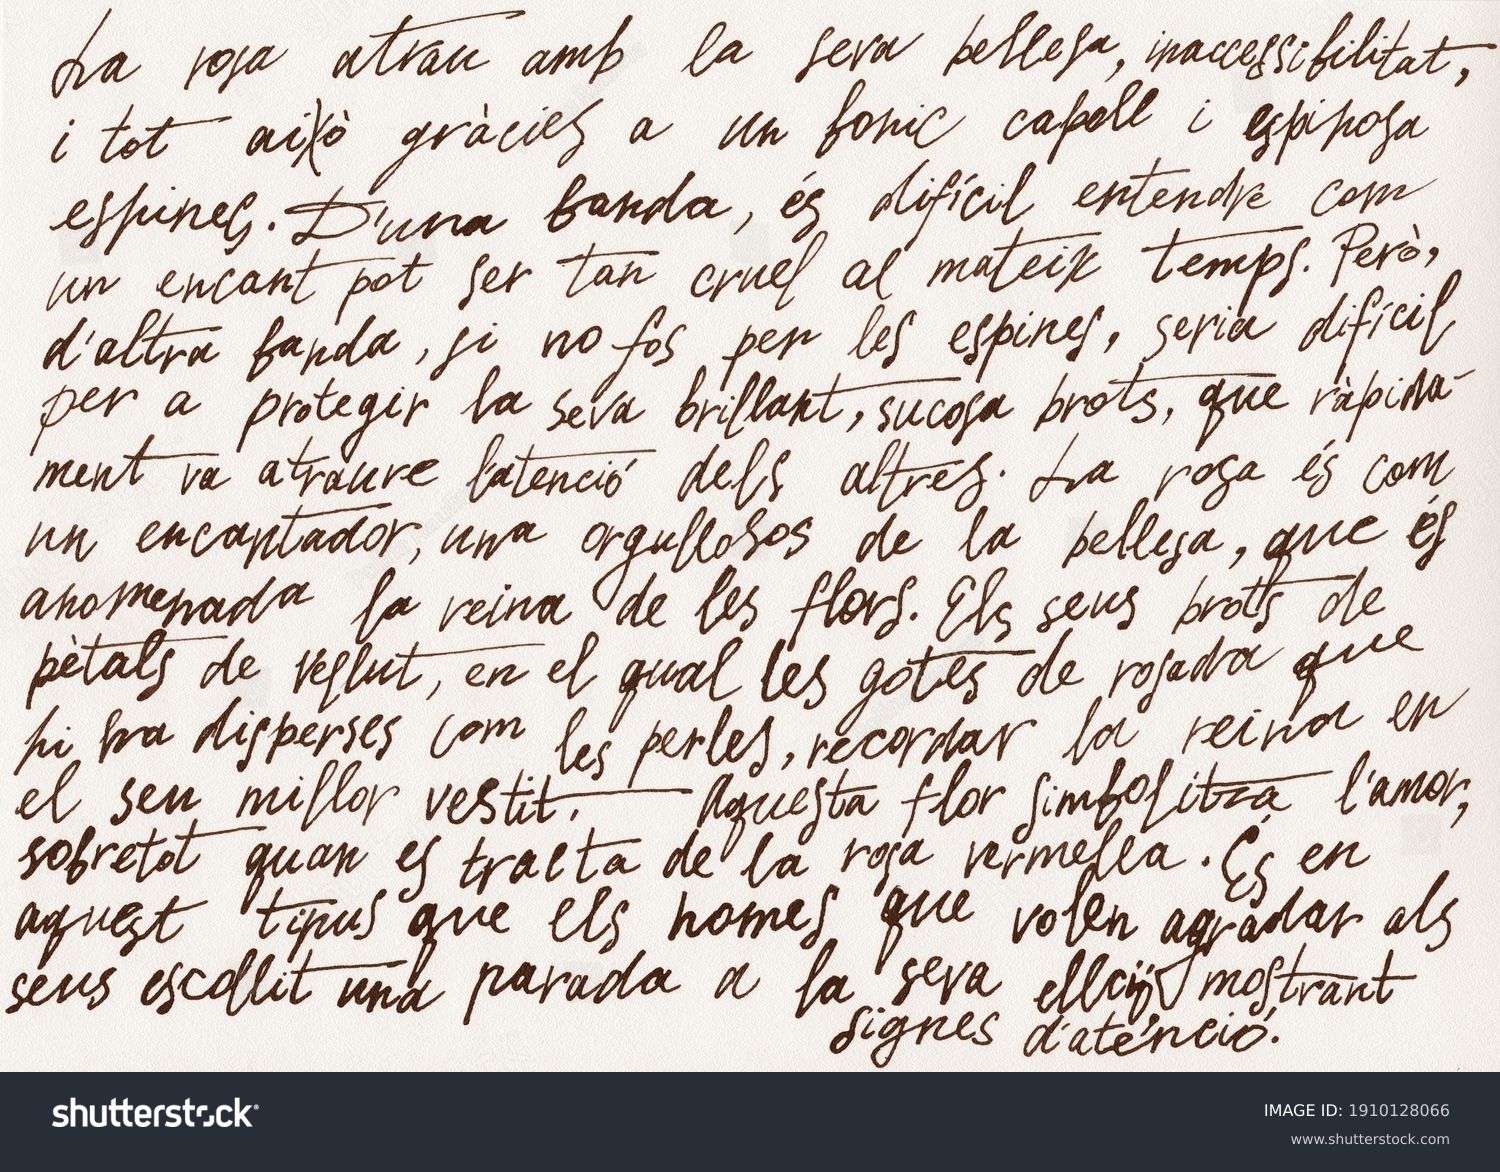 Abstract retro unreadable brown ink-written text.Old manuscript letter with vintage handwriting calligraphy texture.Grungy textured paper background.Scrapbook inscription design template.Lettering. #1910128066